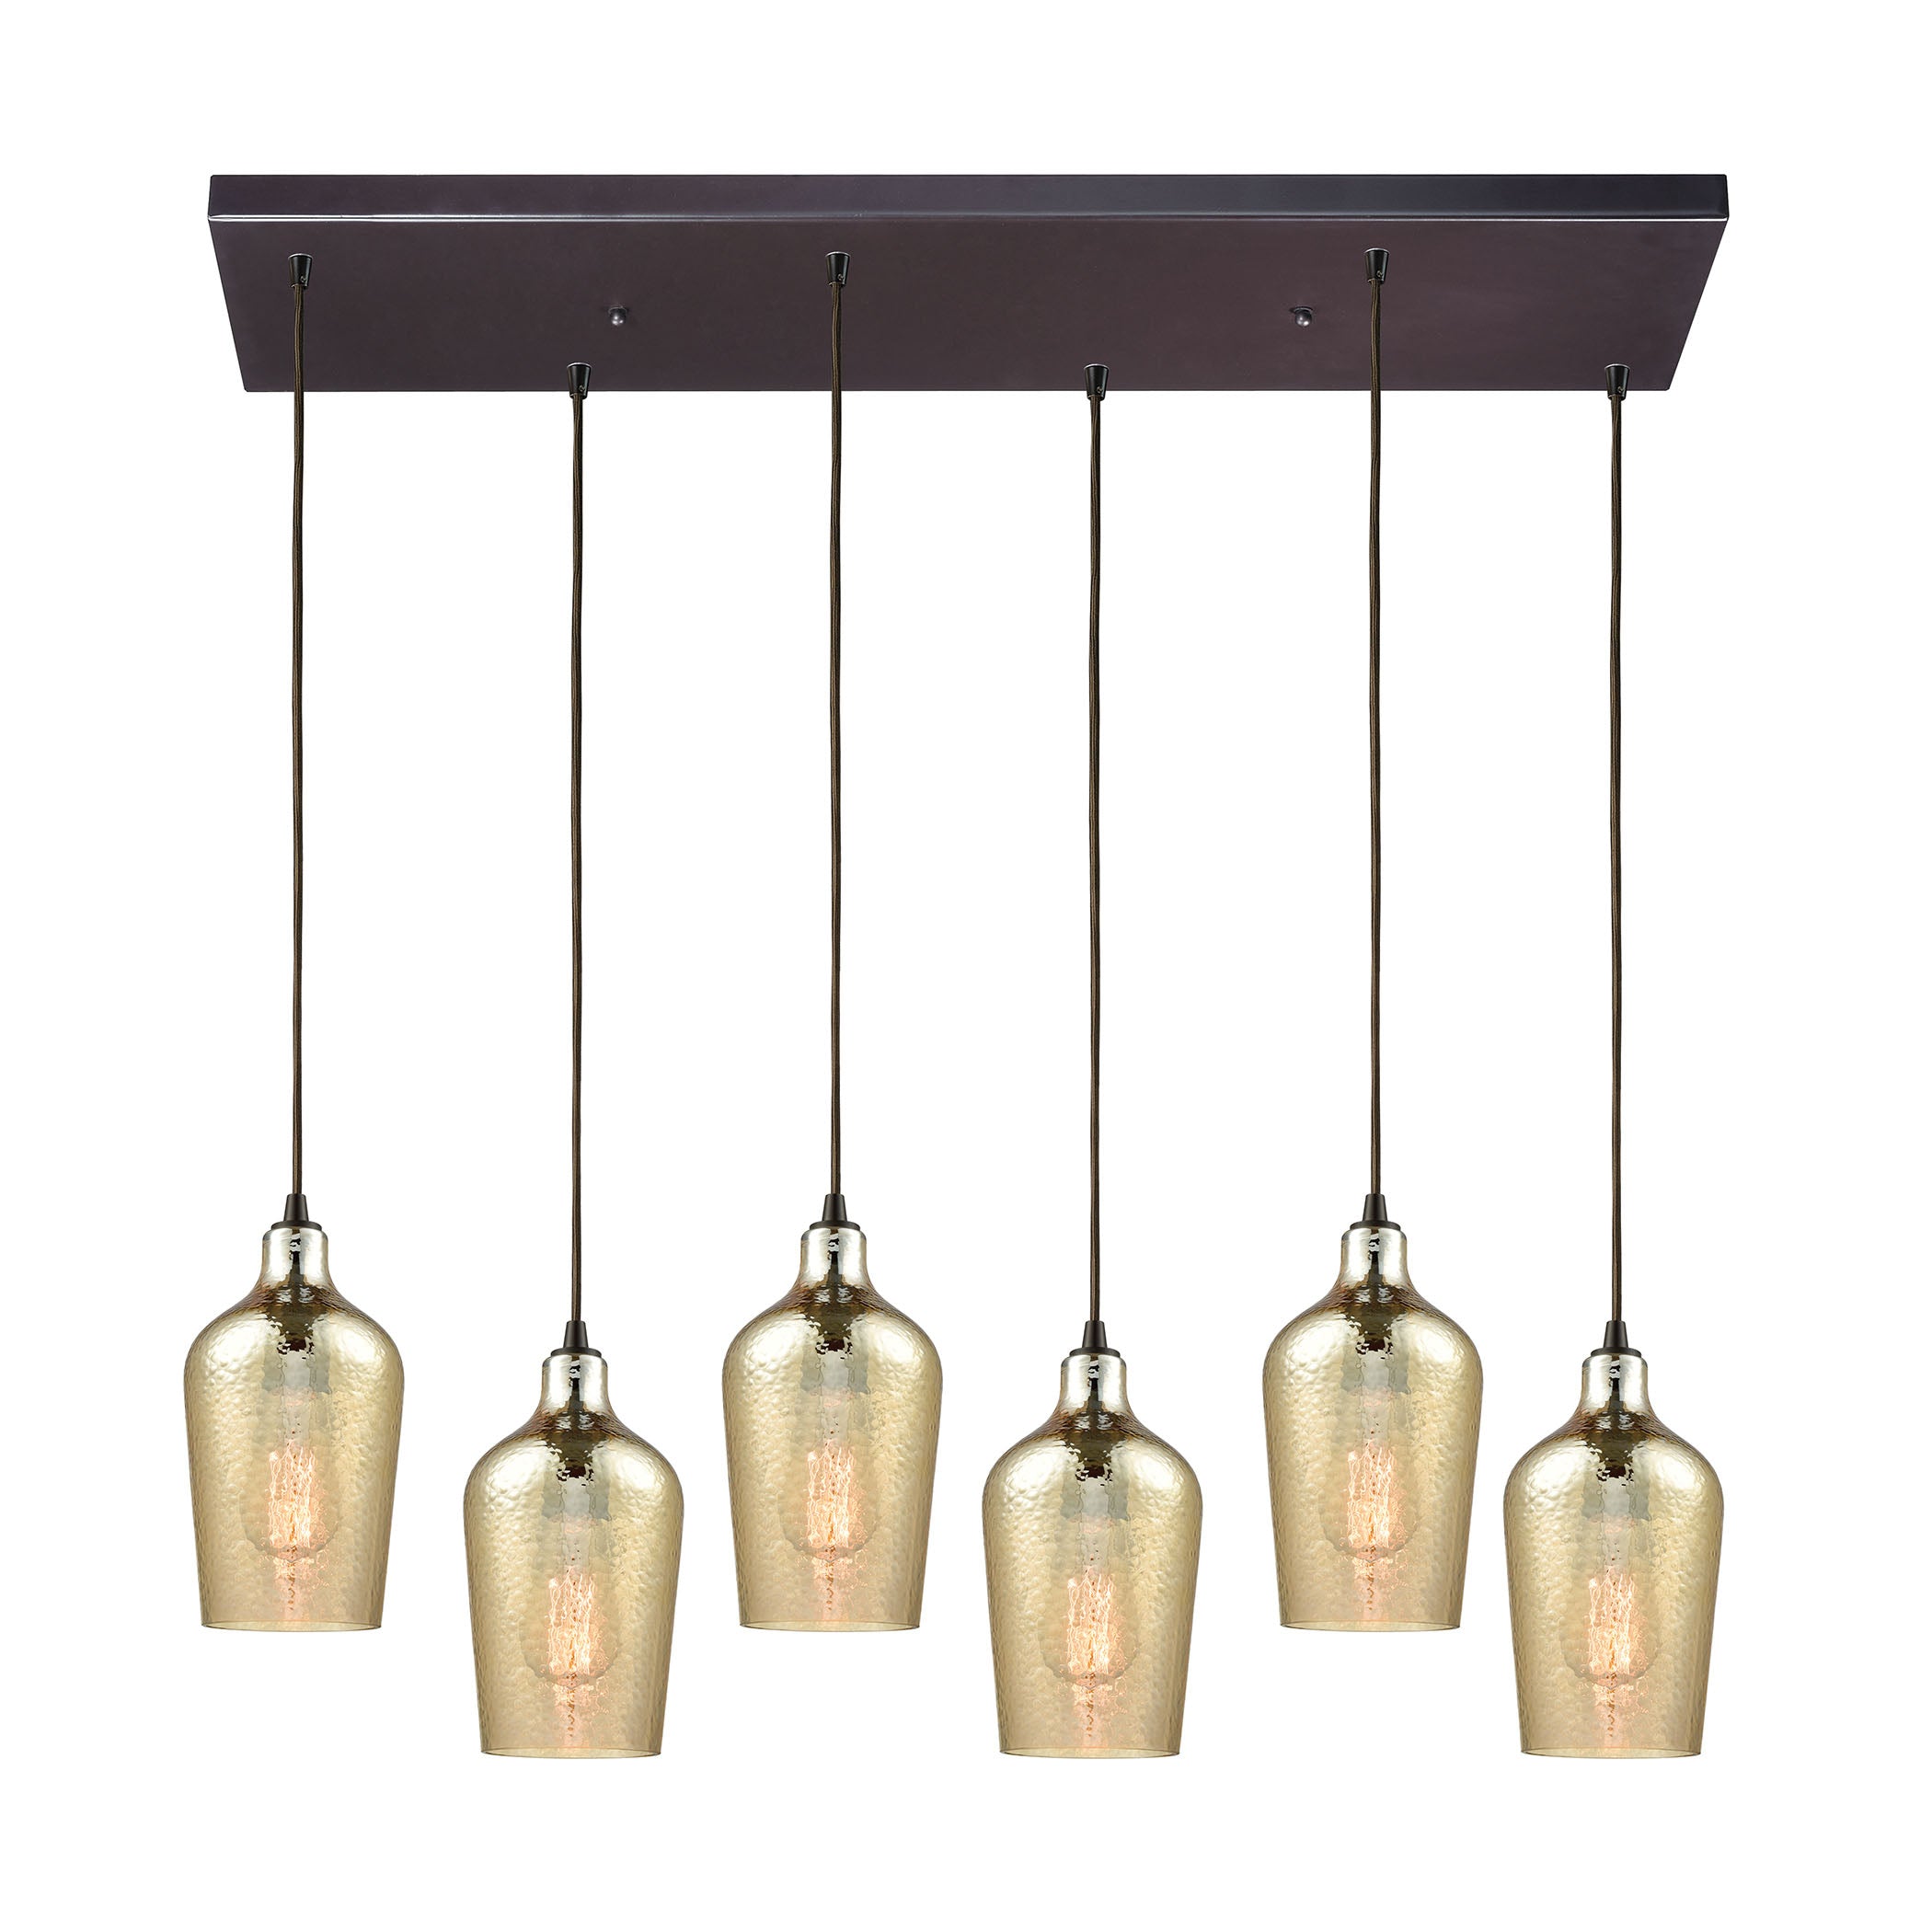 ELK Lighting 10840/6RC Hammered Glass 6-Light Rectangular Pendant Fixture in Oiled Bronze with Amber-plated Hammered Glass